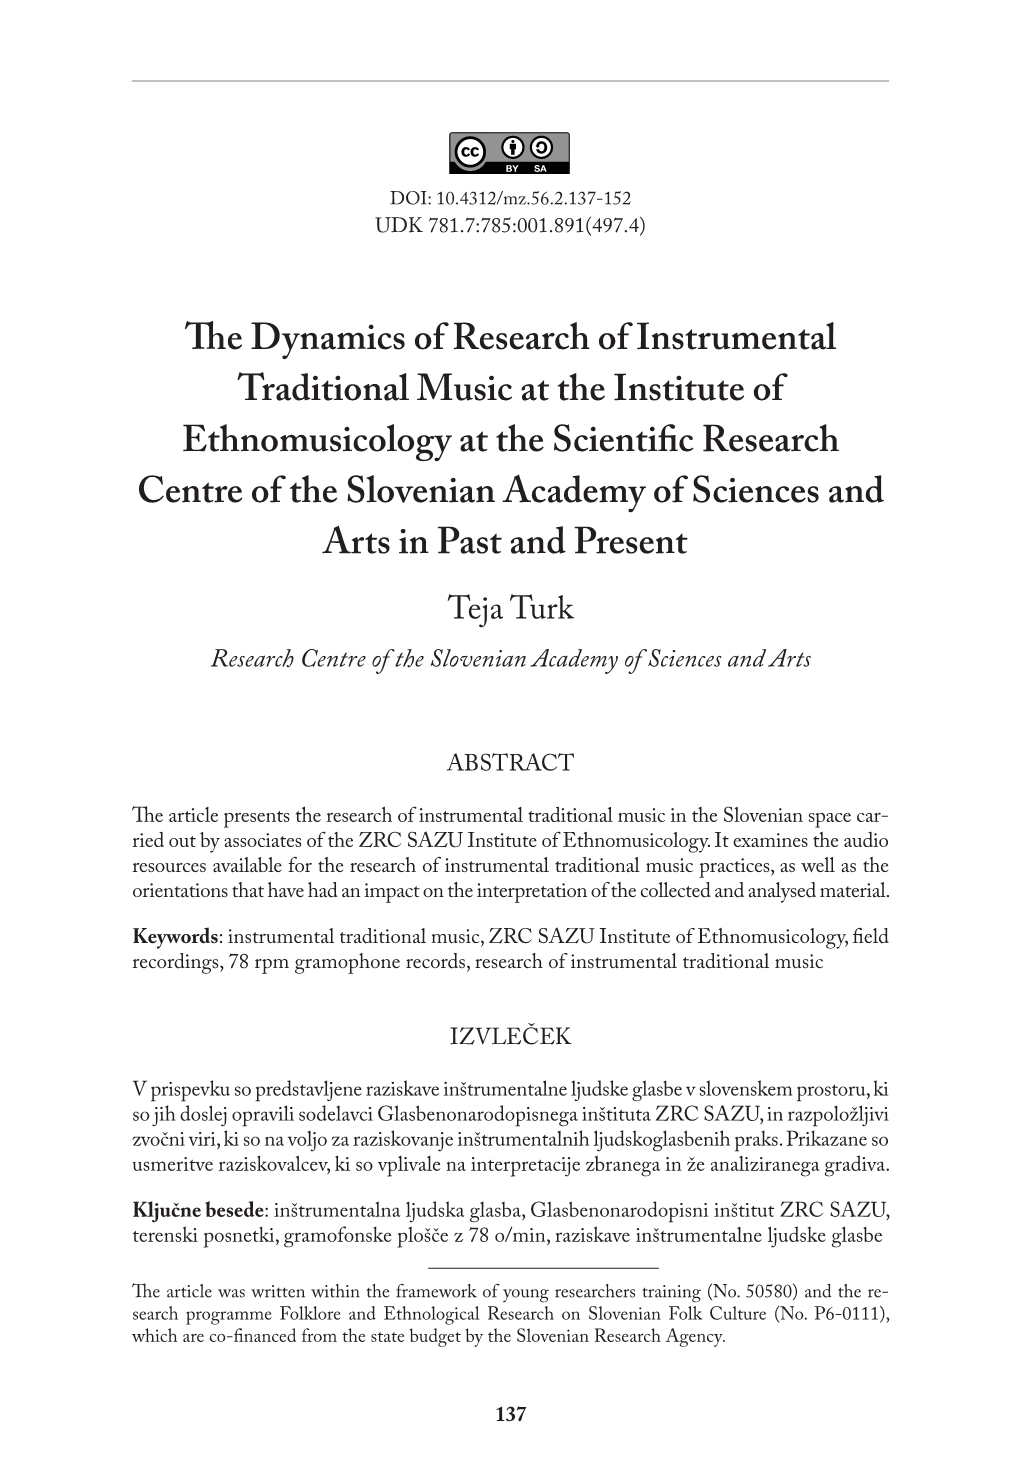 The Dynamics of Research of Instrumental Traditional Music at the Institute of Ethnomusicology at the Scientific Research Centre